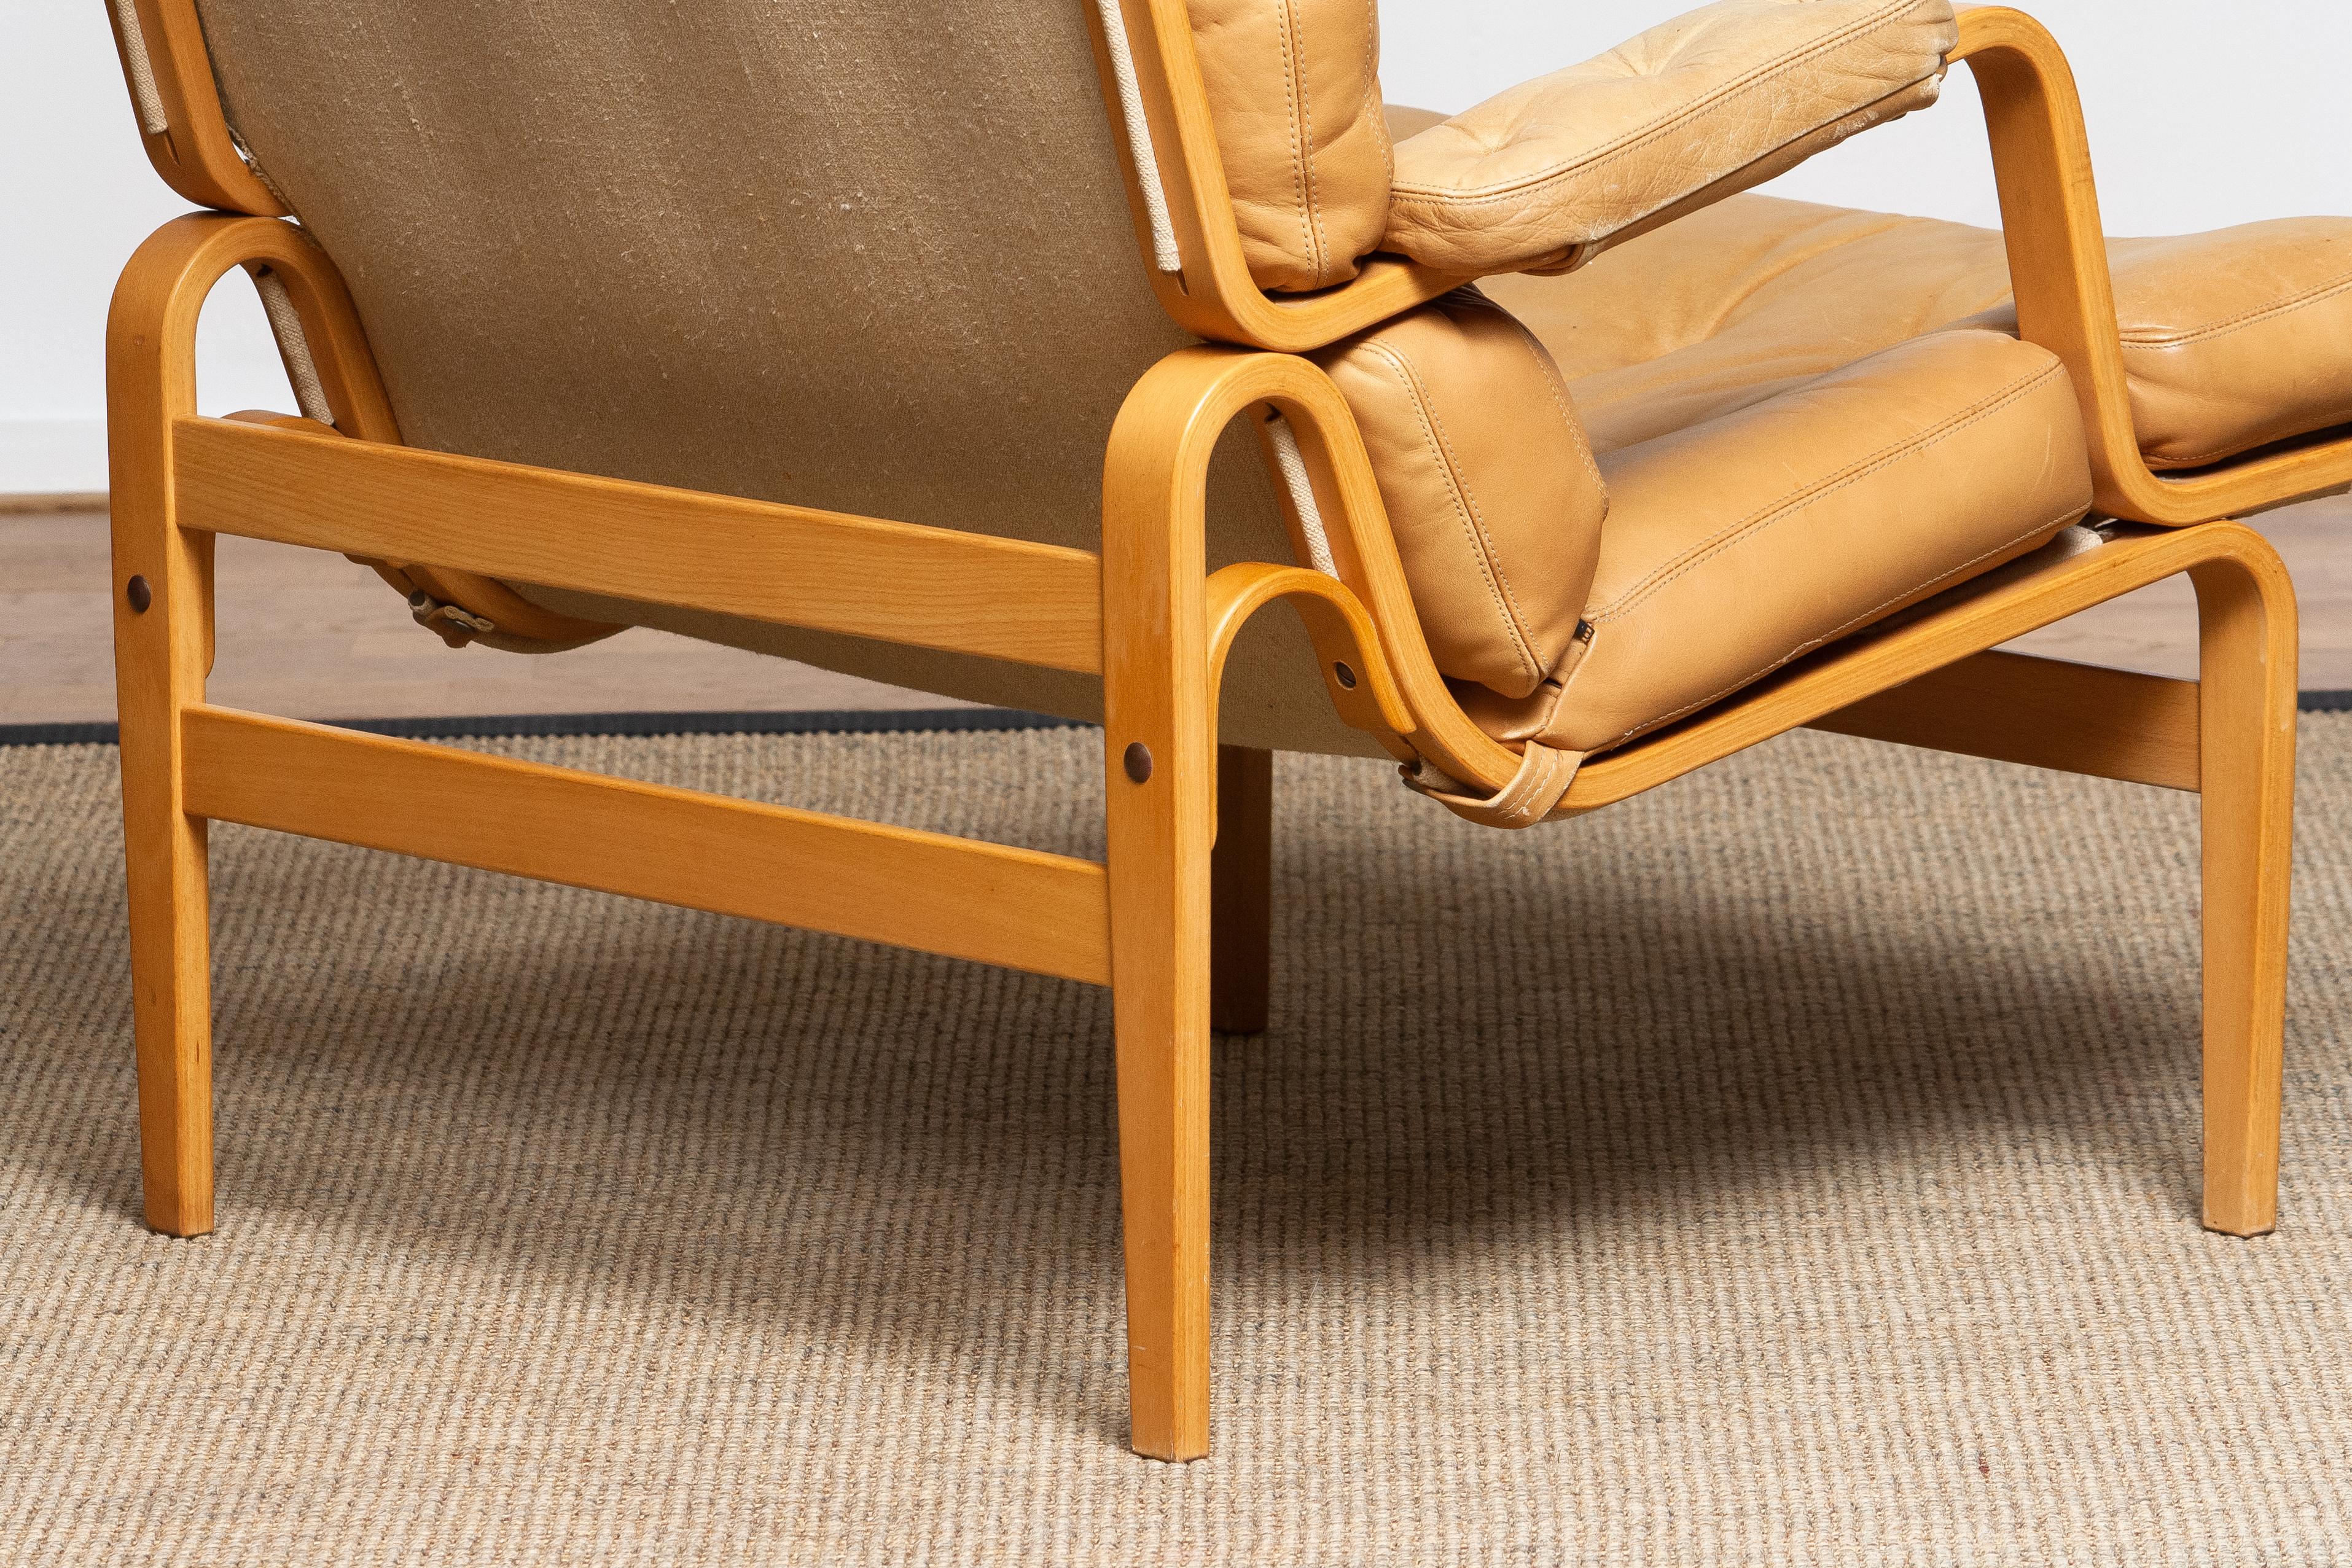 Mid-20th Century 1960s, Beech and Leather Lounge / Easy Chair by Bruno Mathsson for DUX in Camel